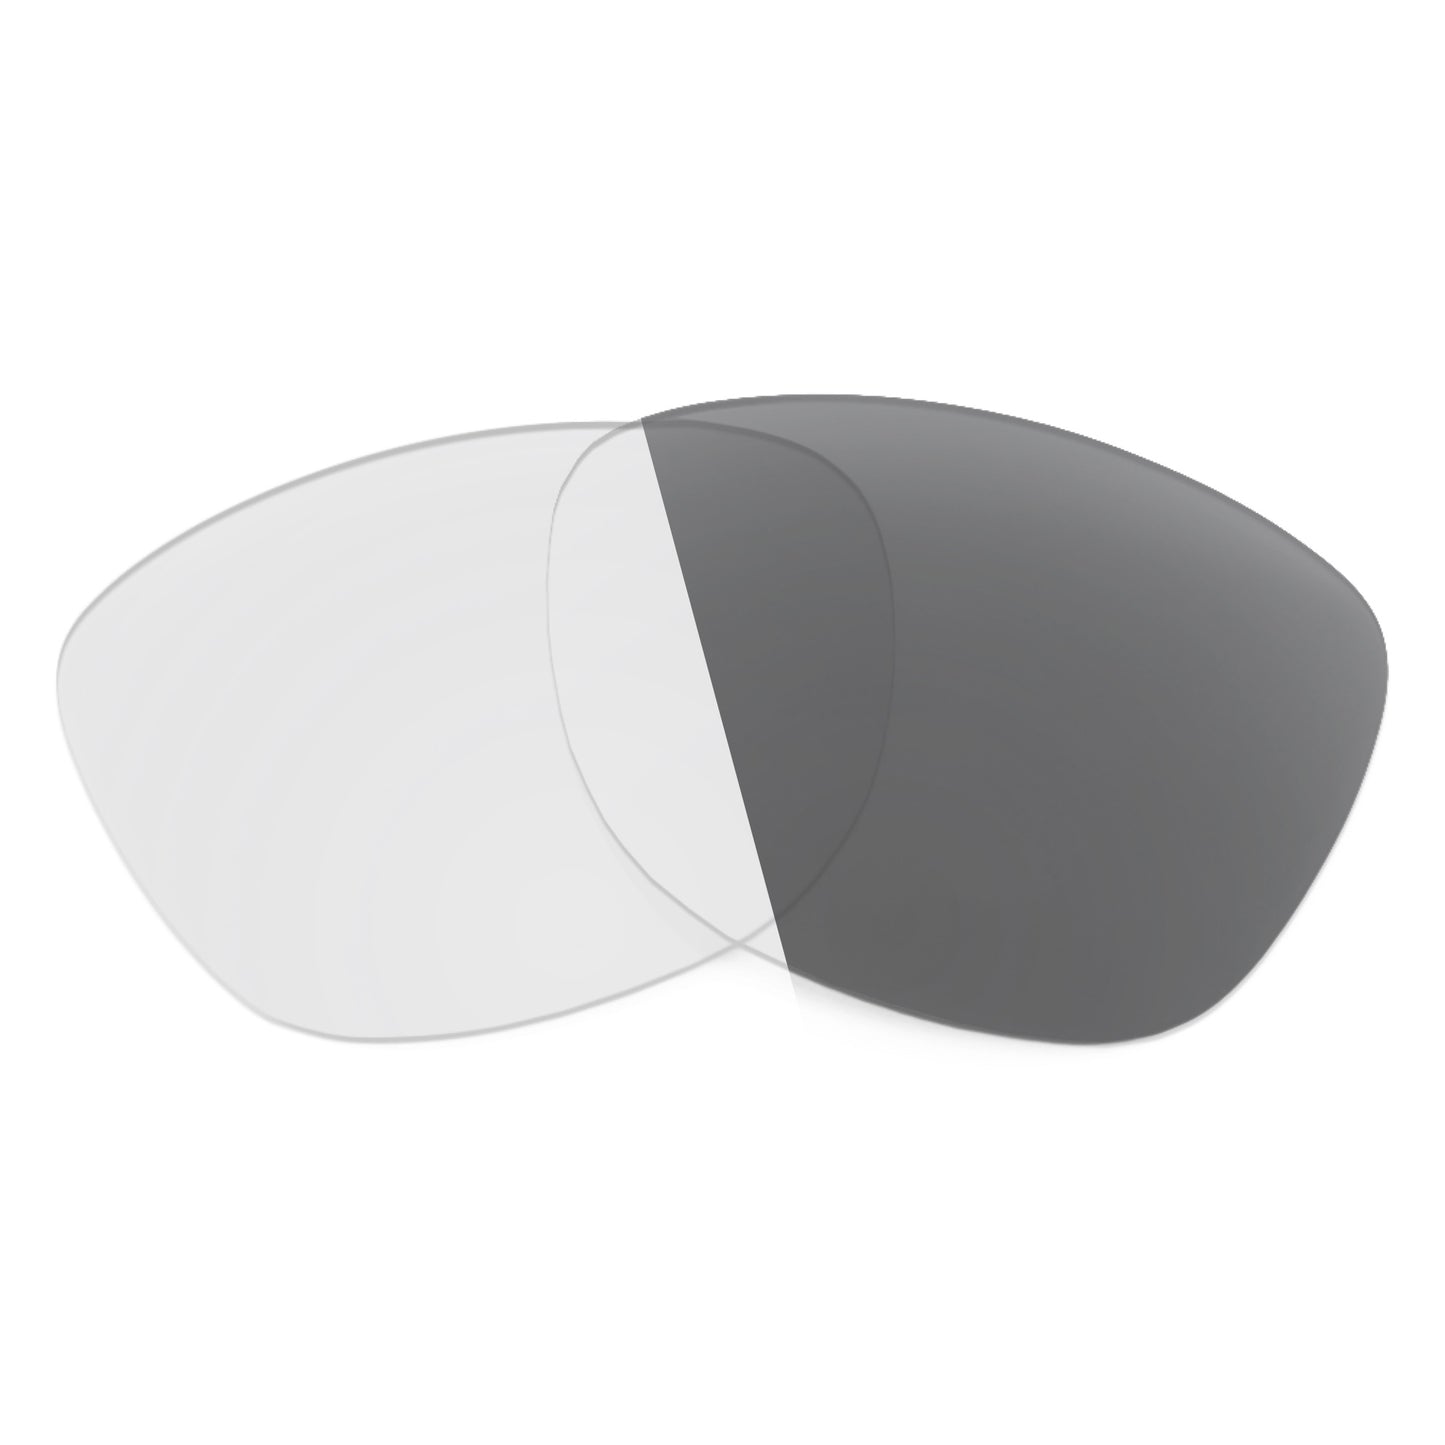 Revant replacement lenses for Ray-Ban PS1 W2682 (B&L) Non-Polarized Adapt Gray Photochromic